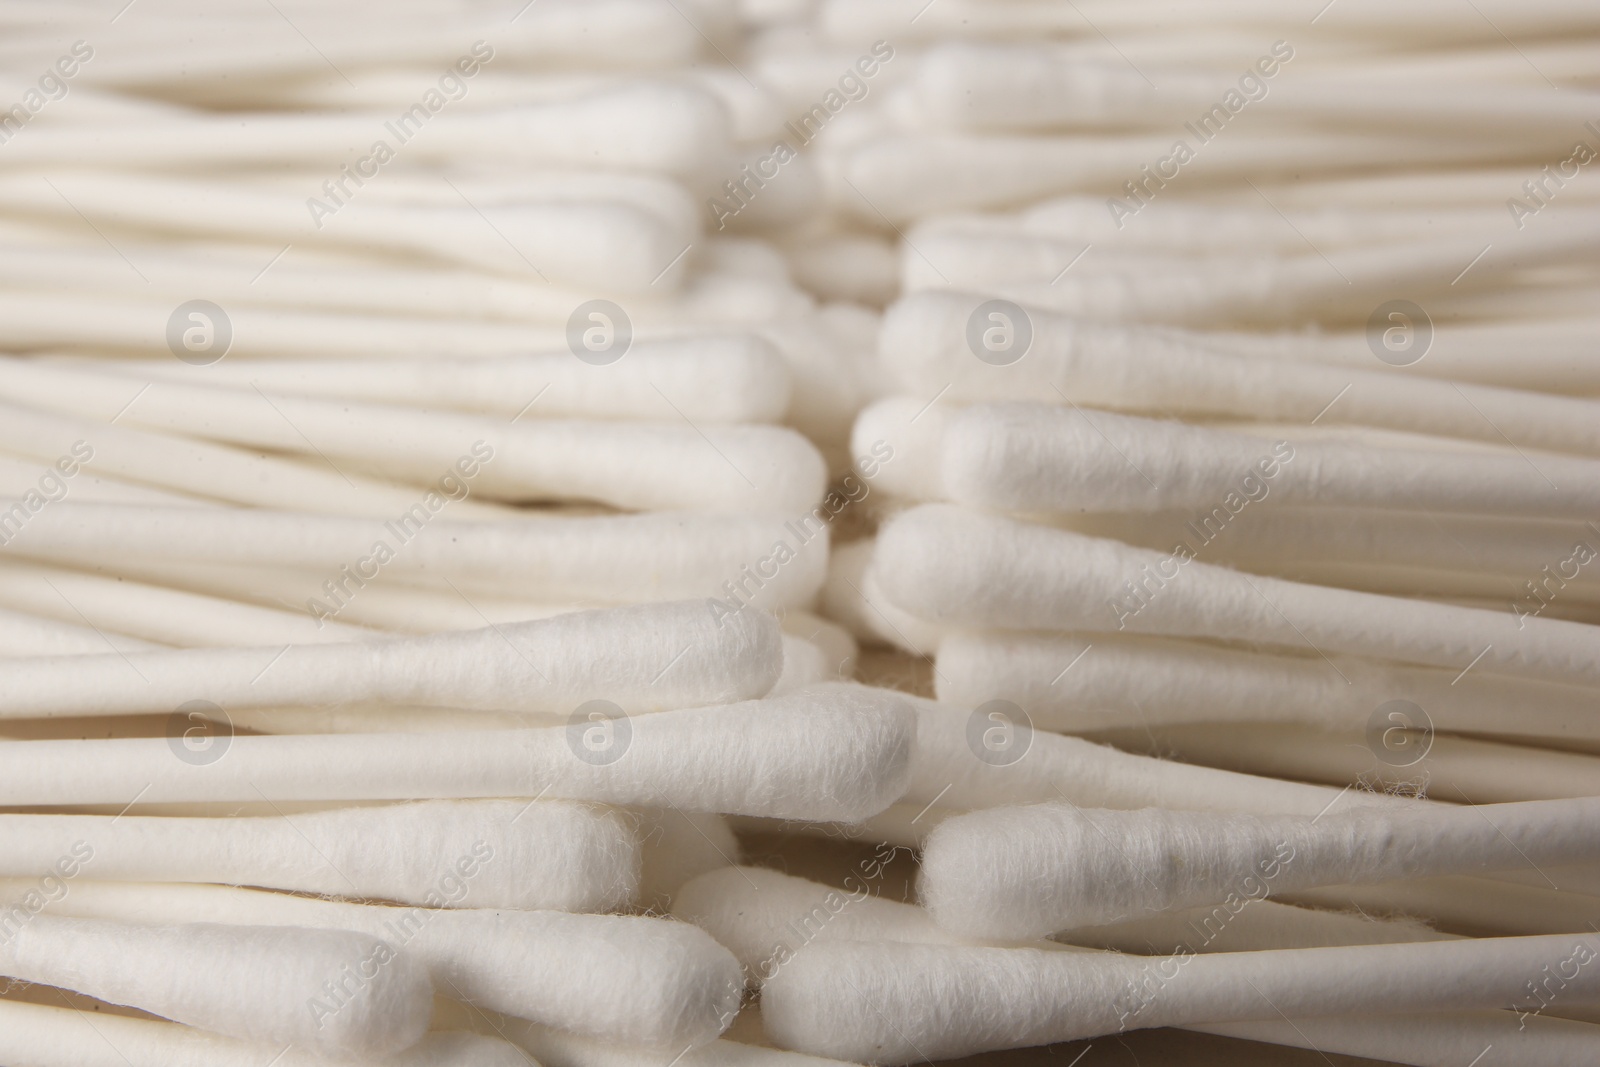 Photo of Many clean cotton buds as background, closeup